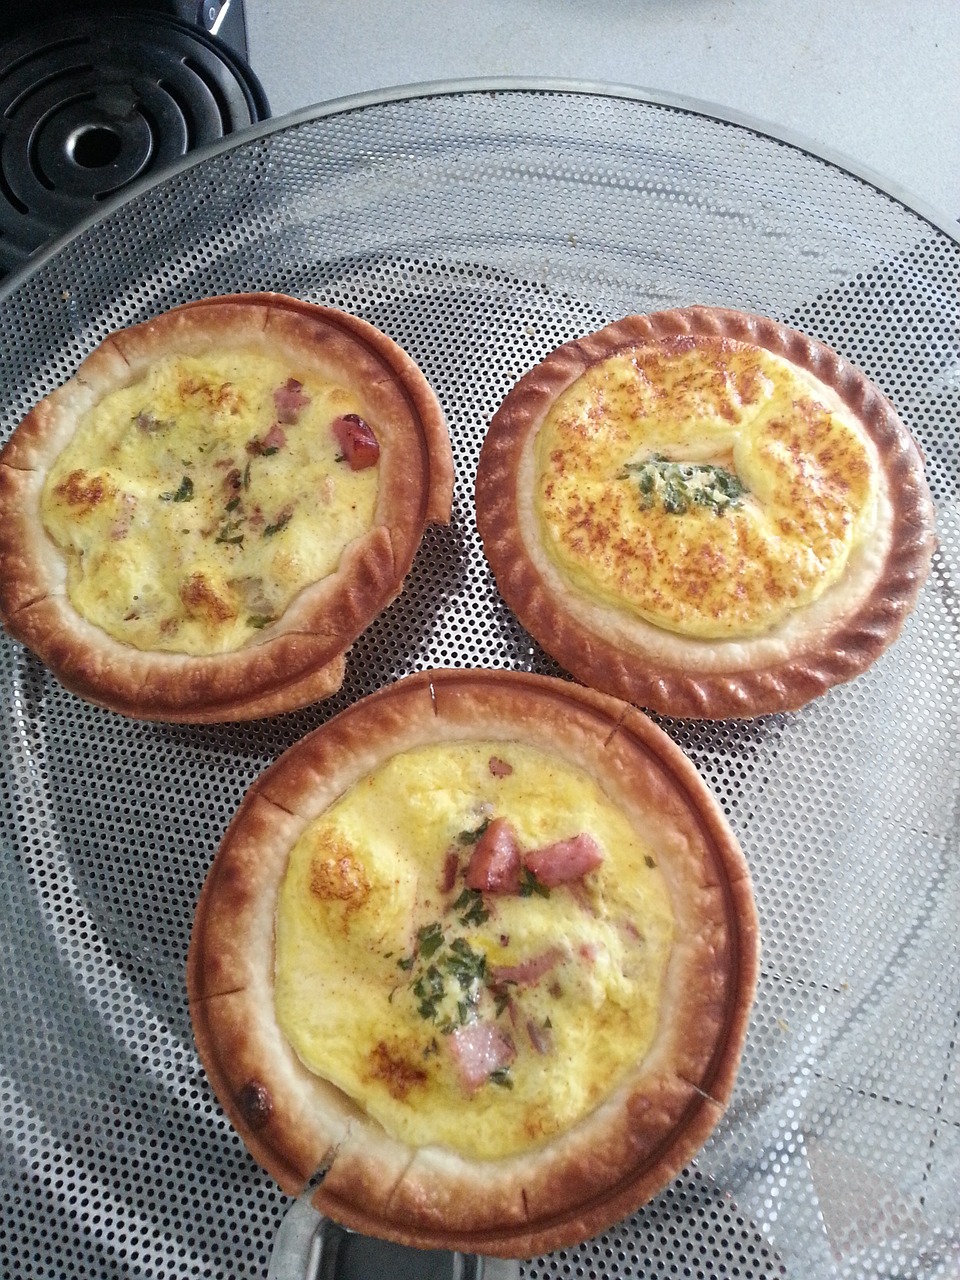 Quiche to Go (Adapted from South Beach Diet)